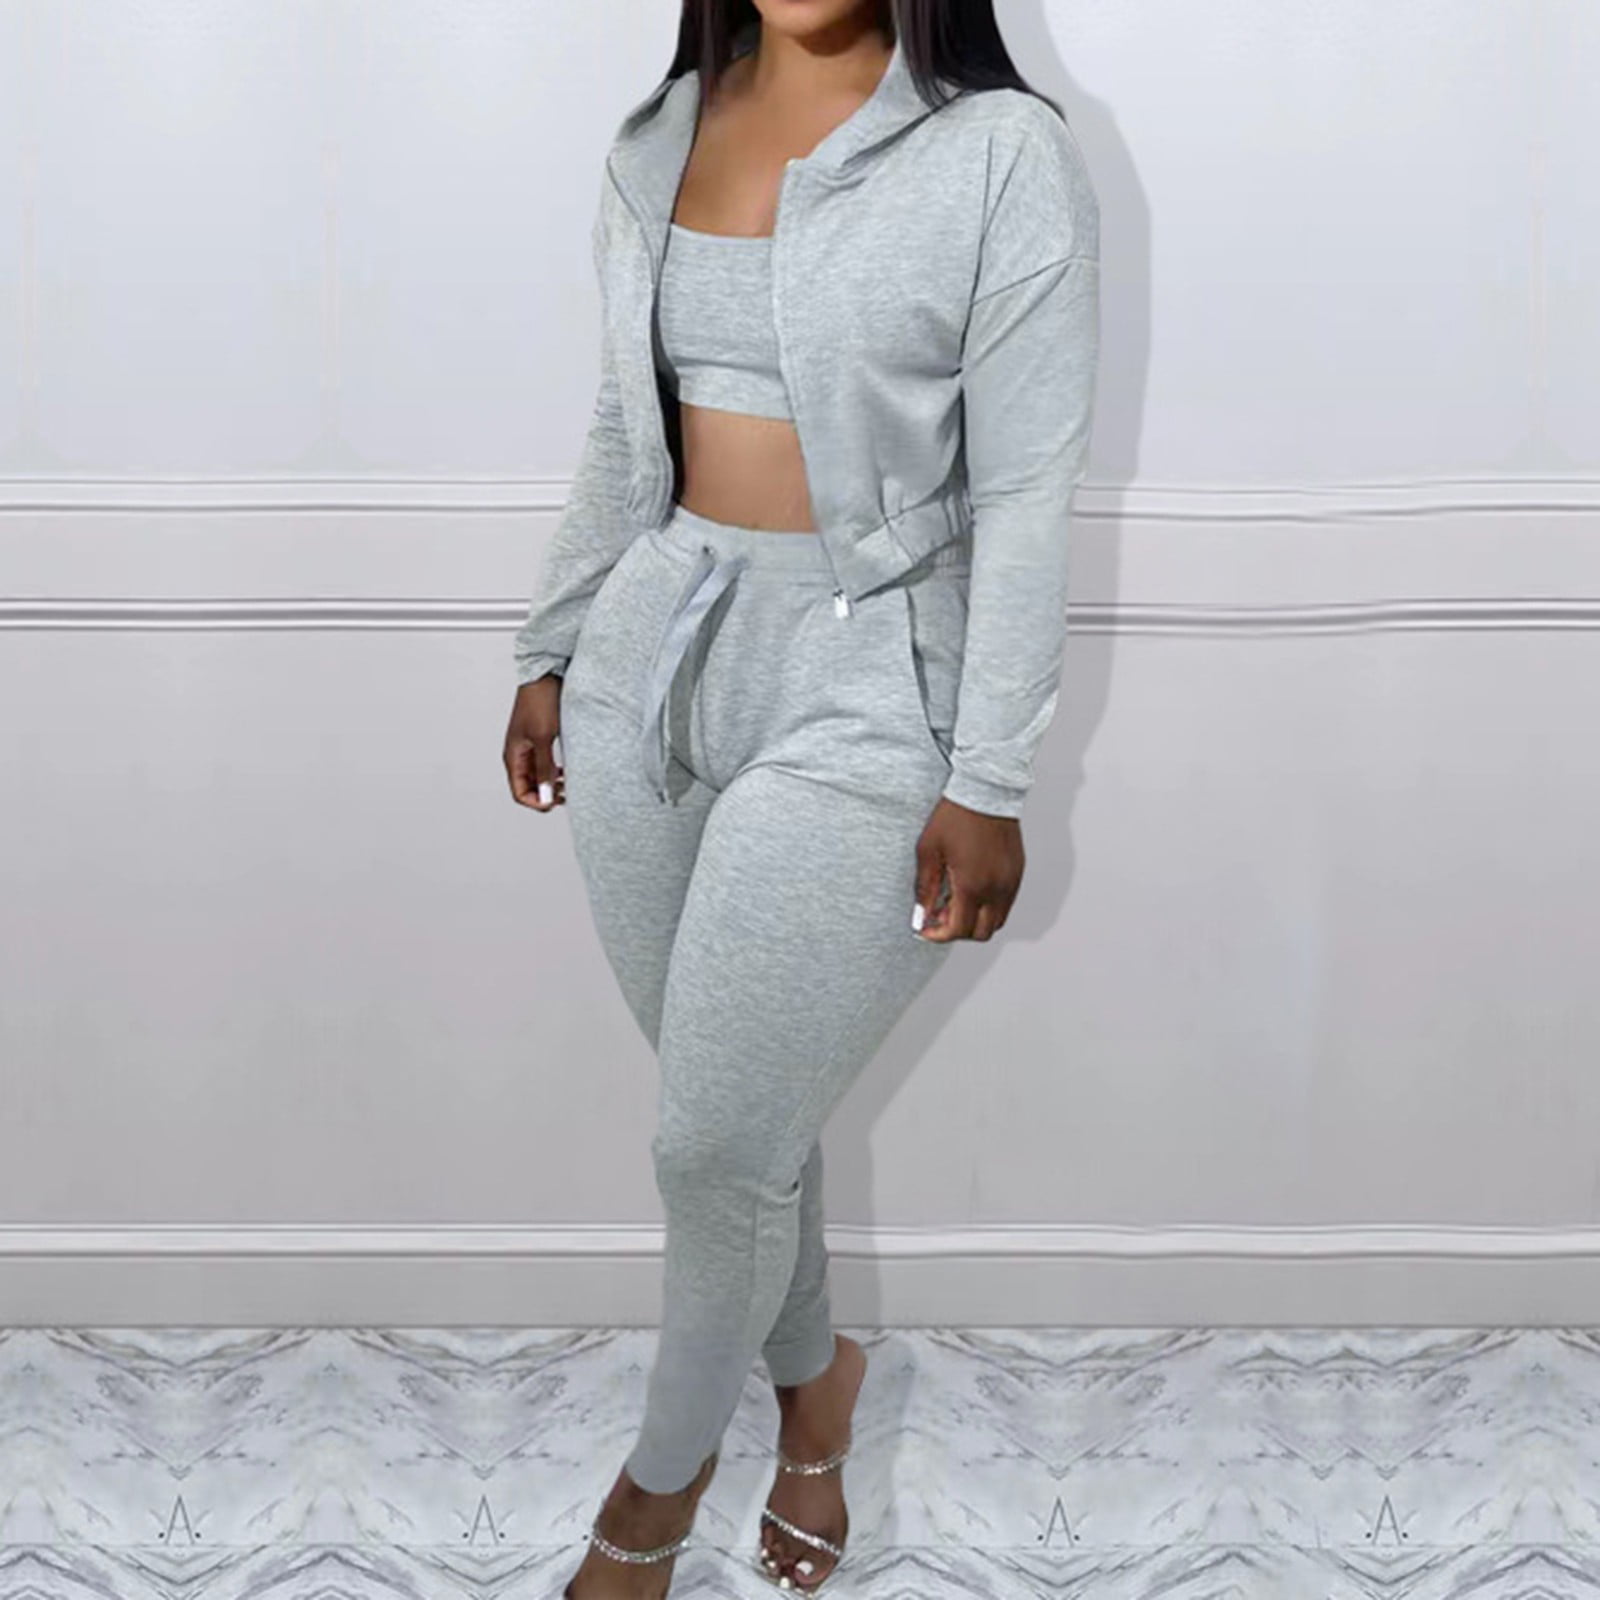 Churchf Autumn Gray 2 Two Piece Sets Tracksuit Womens Outfits